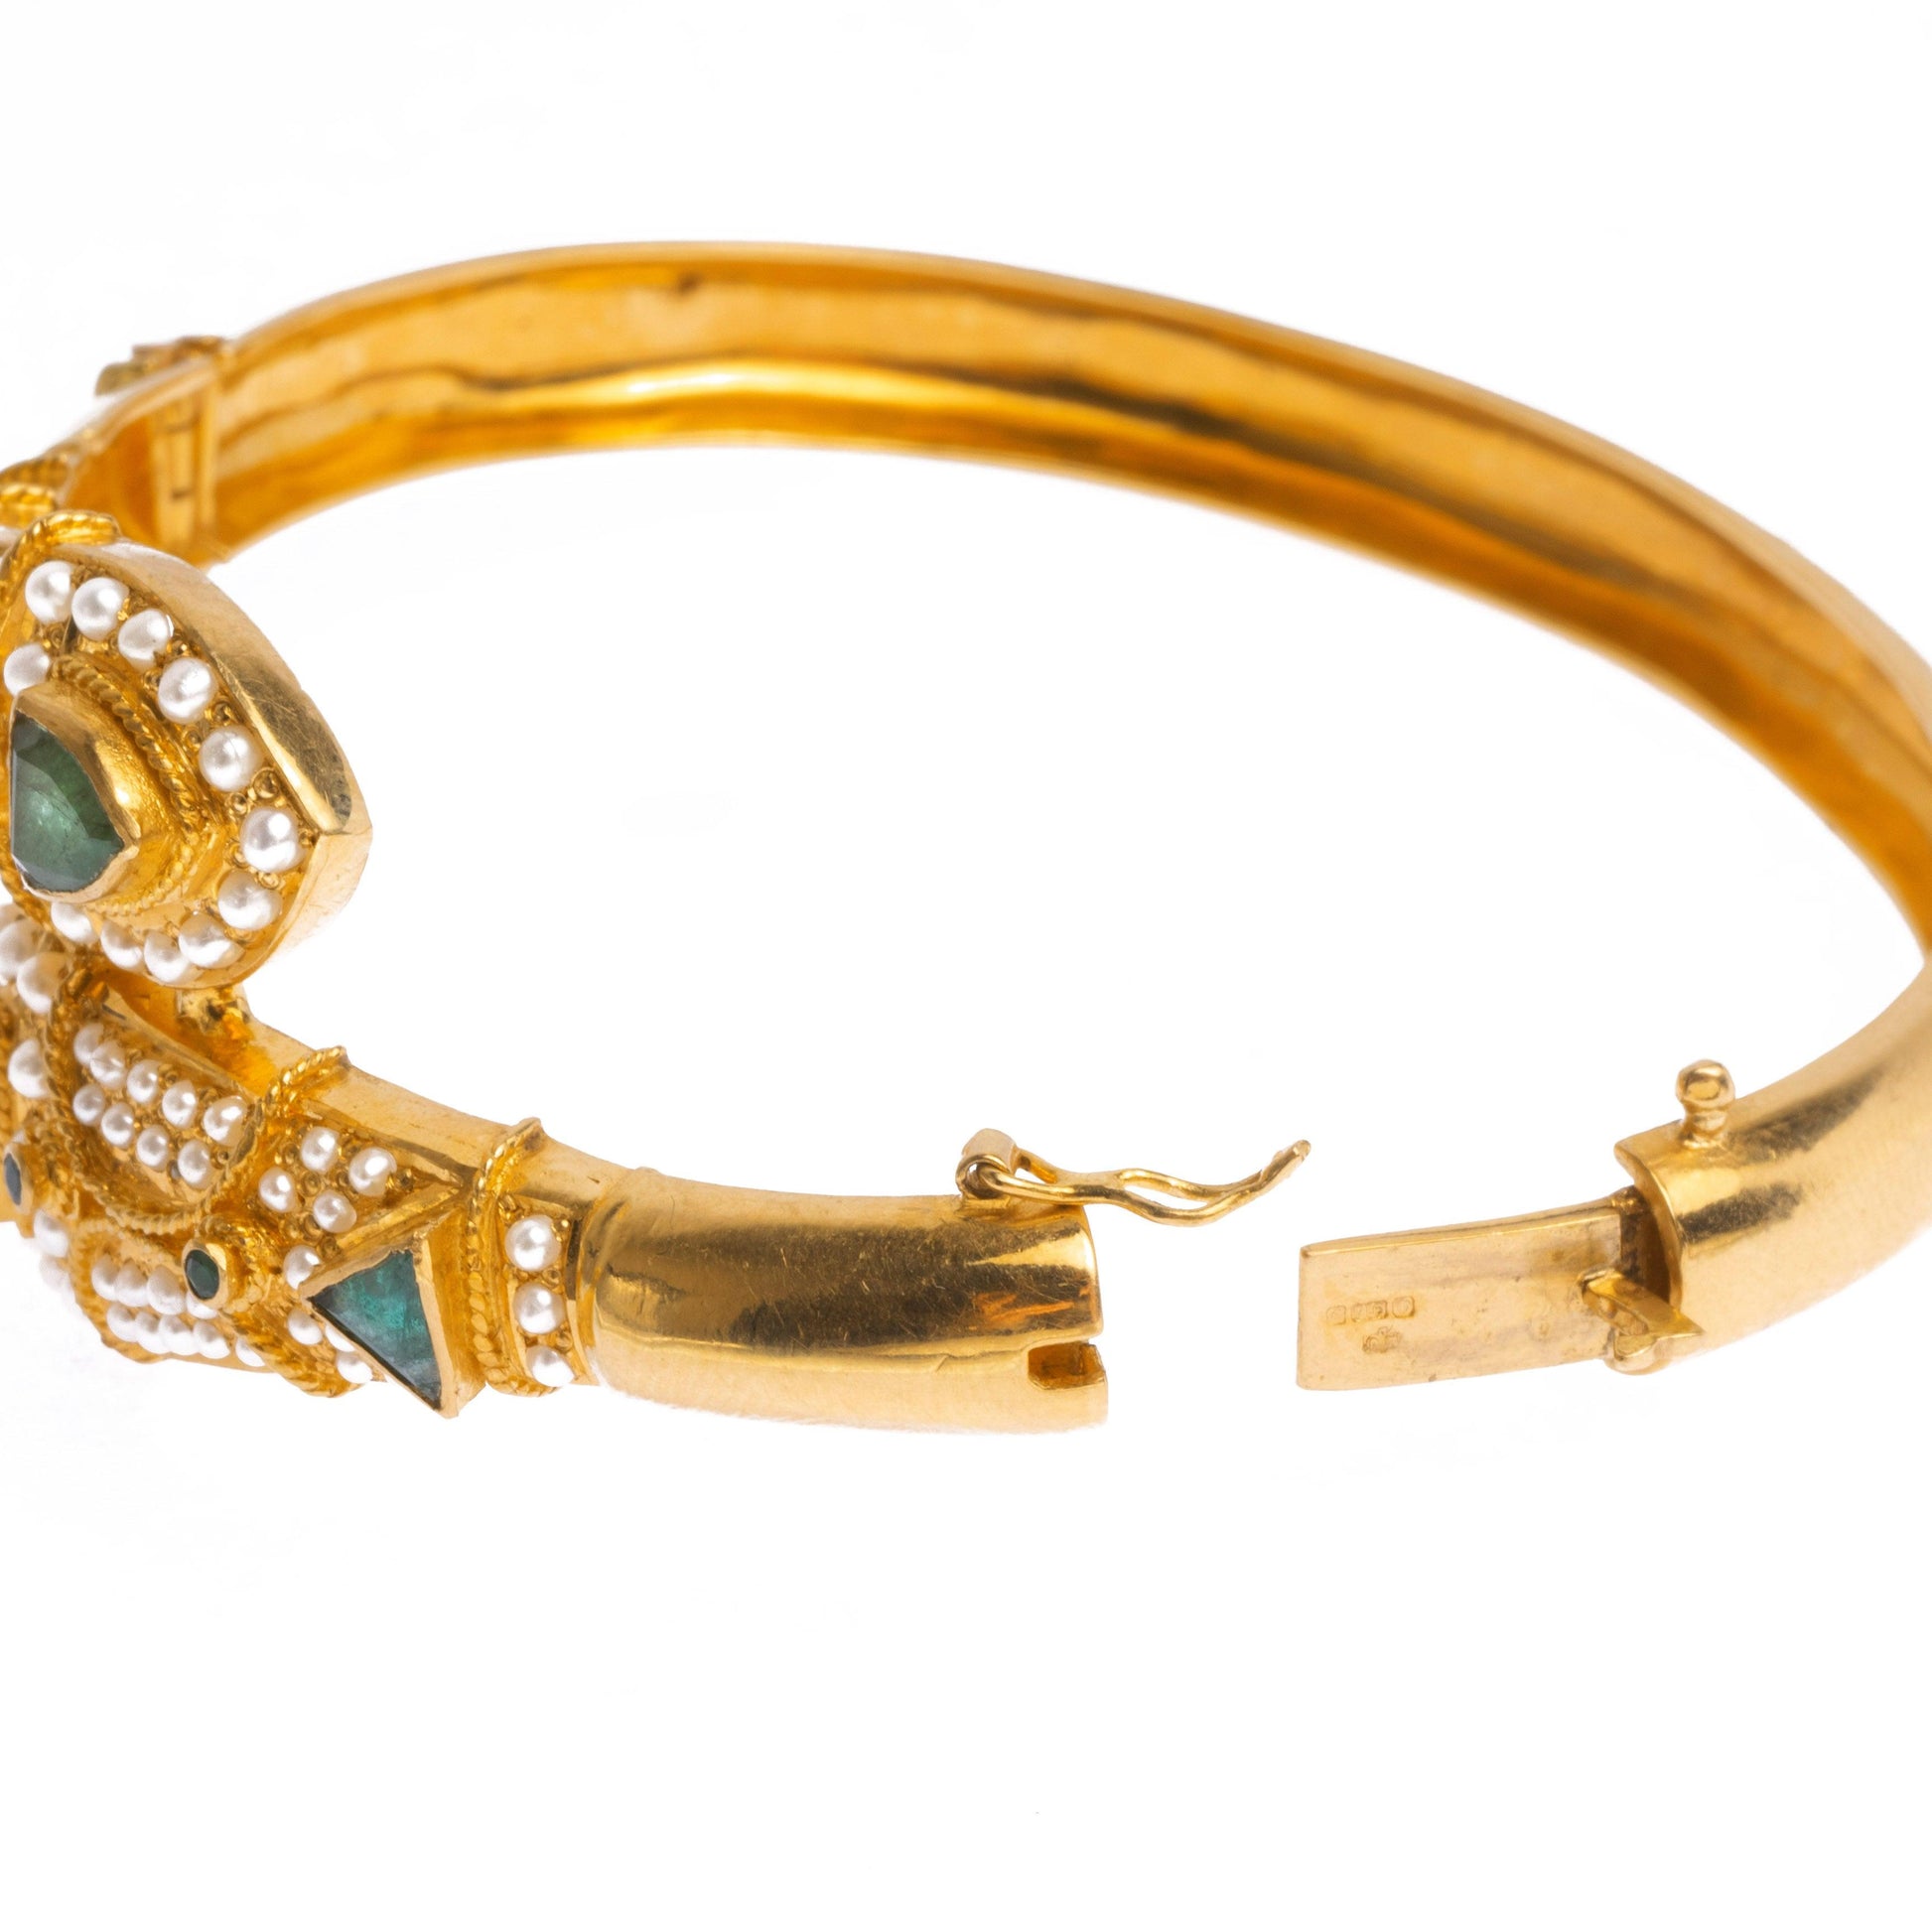 22ct Gold Antiquated Look Openable Bangle set with Green Stones and Cultured Pearls B-8447 - Minar Jewellers